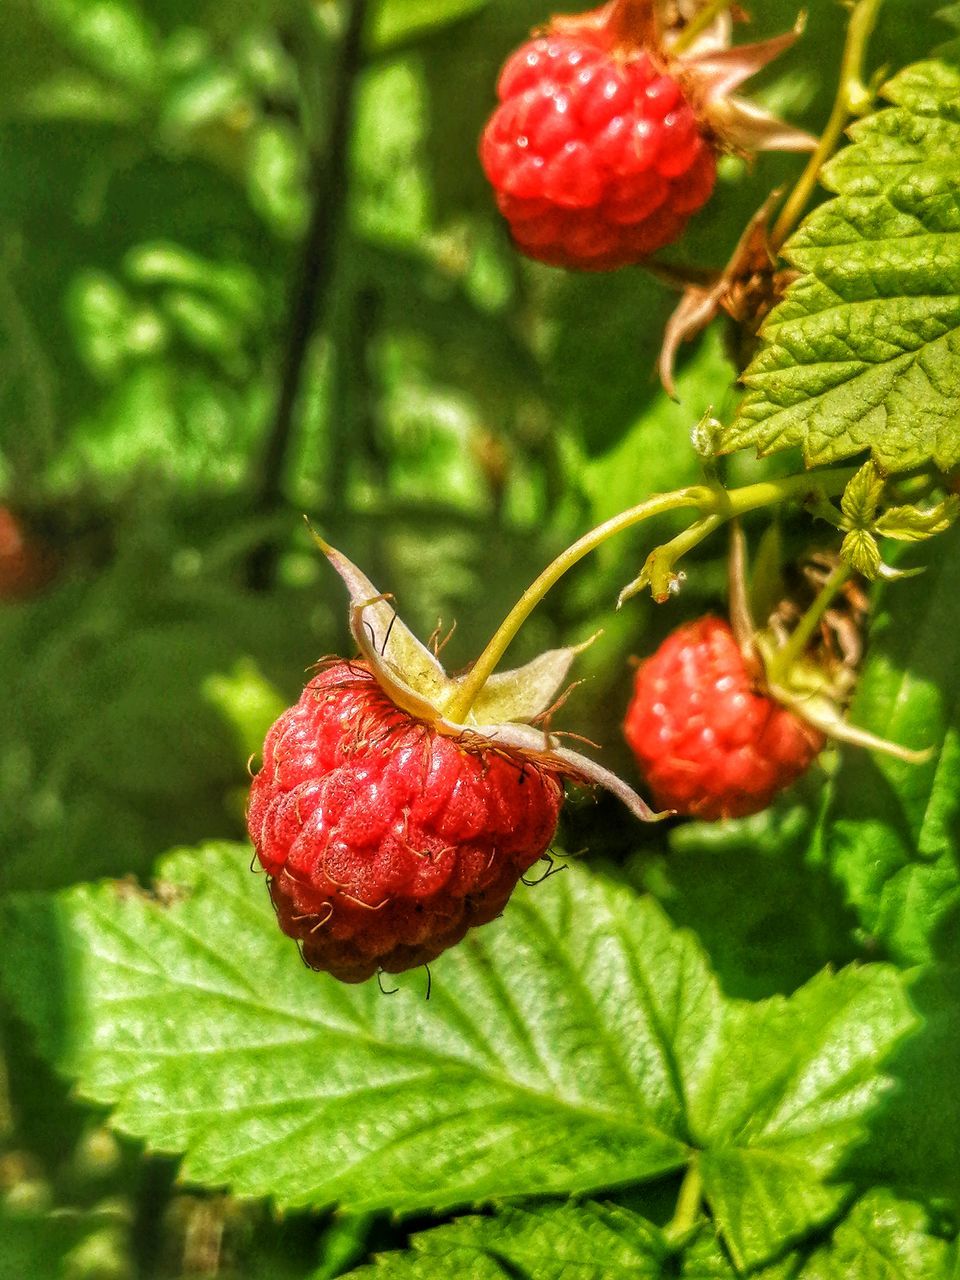 CLOSE-UP OF STRAWBERRIES